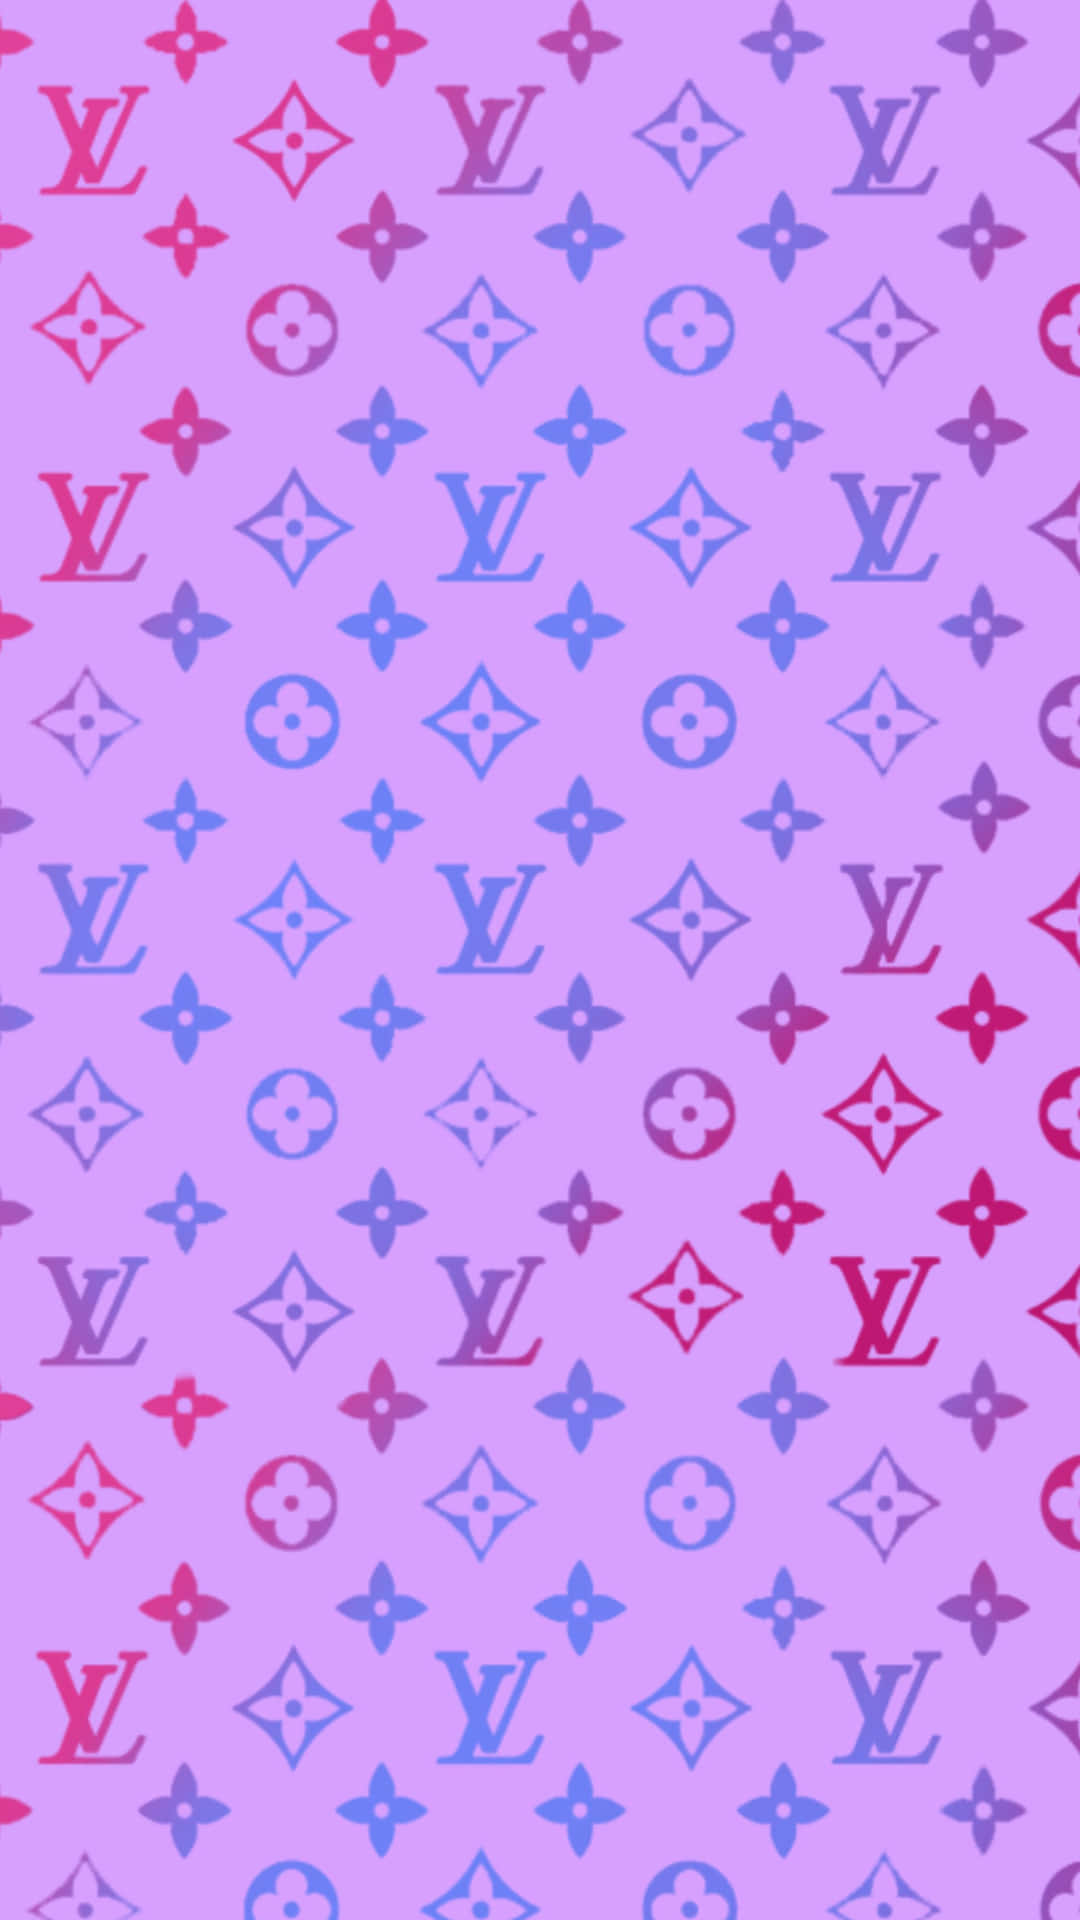 Download 'Be the flower of the crowd with the latest LV fashion!' Wallpaper